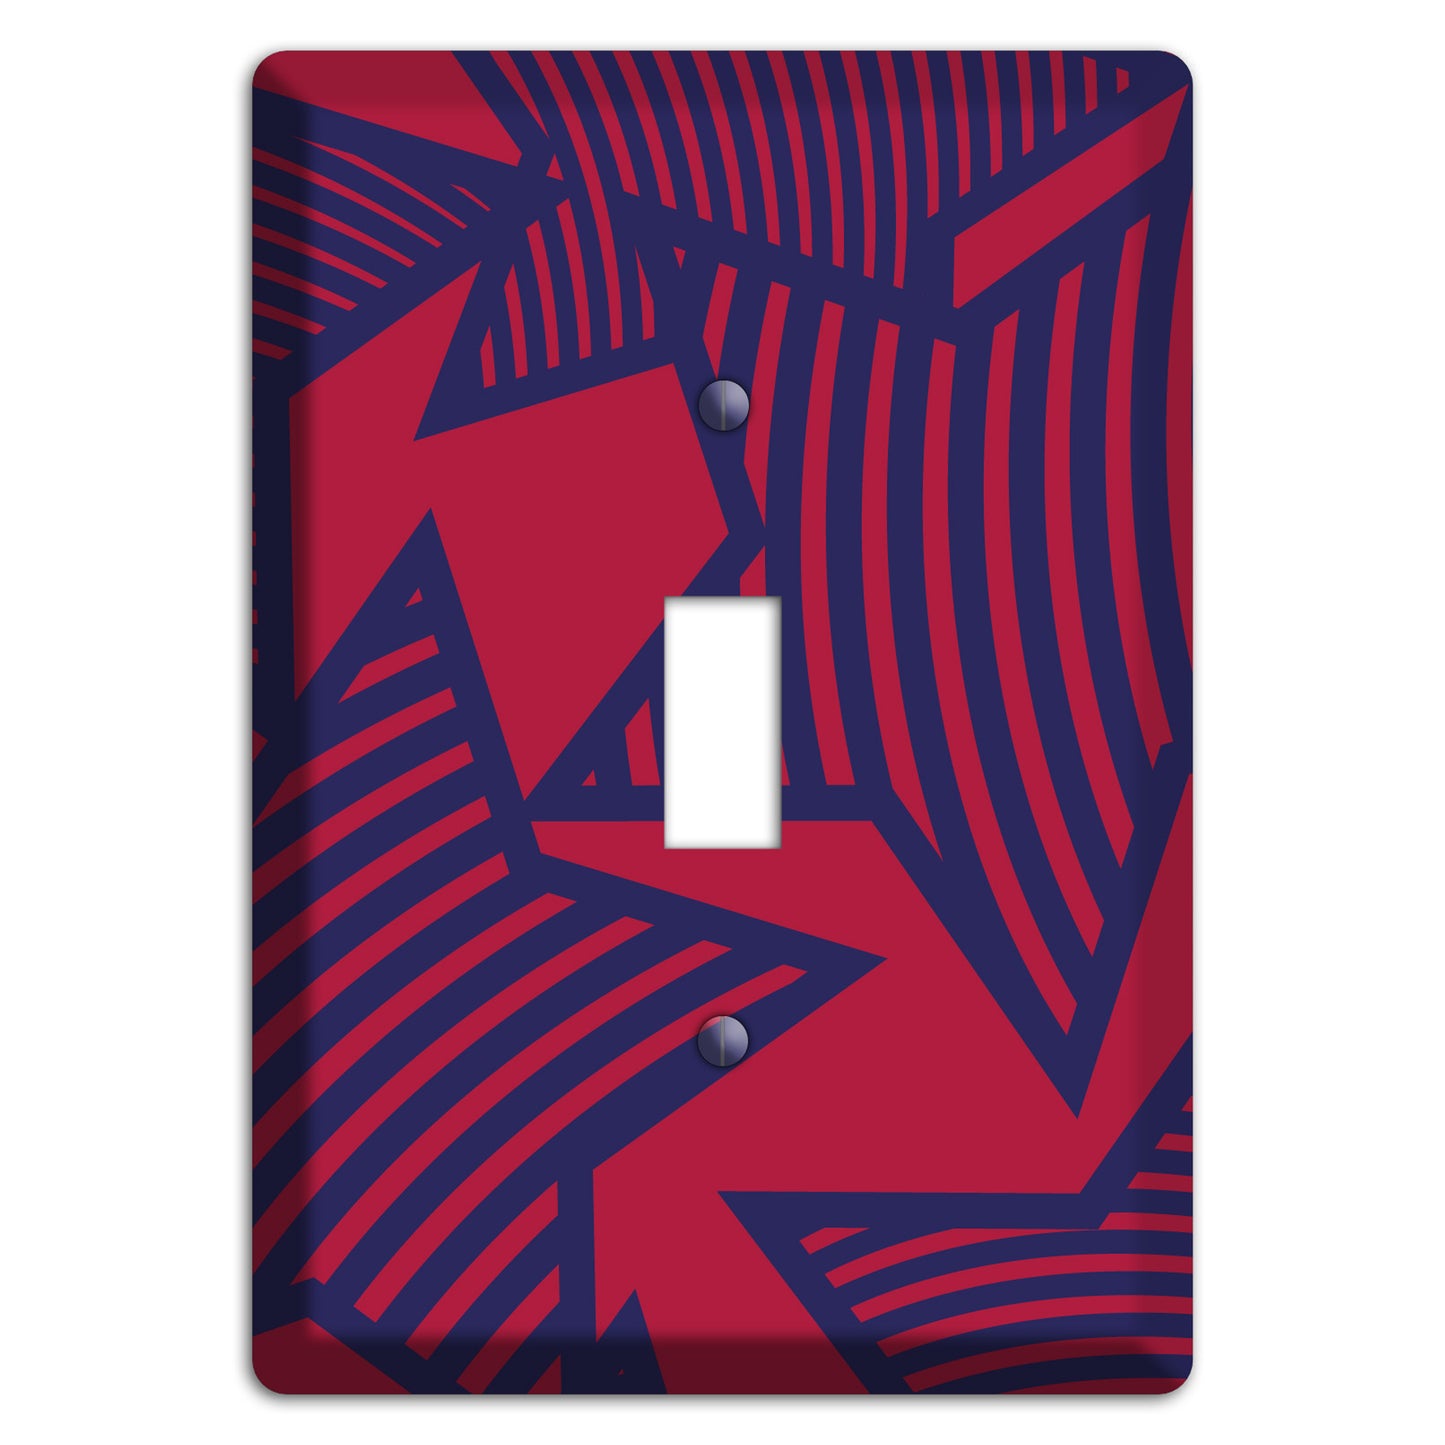 Red with Large Blue Stars Cover Plates